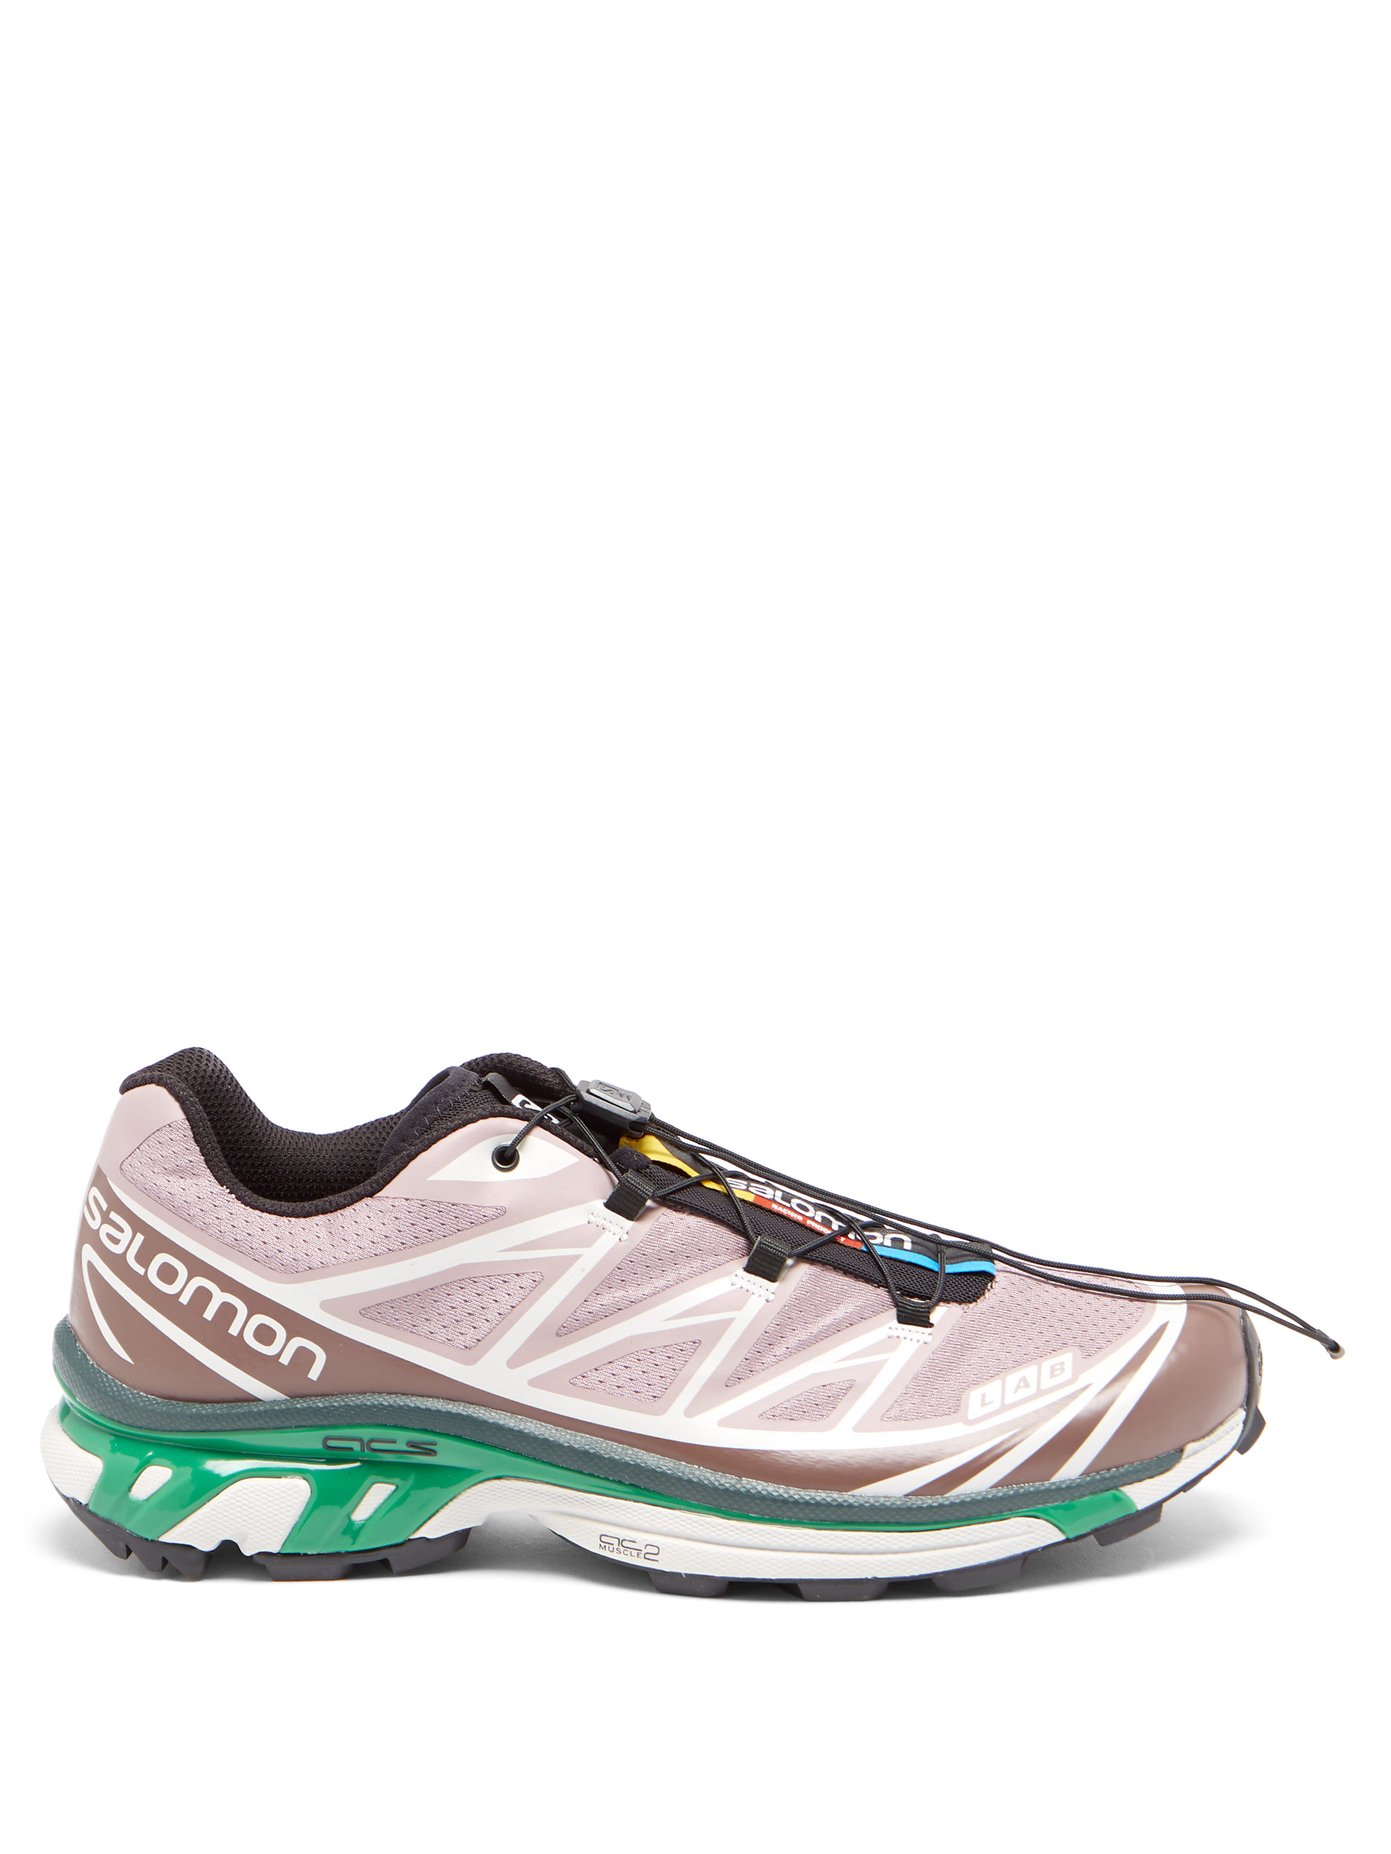 trail running shoes uk